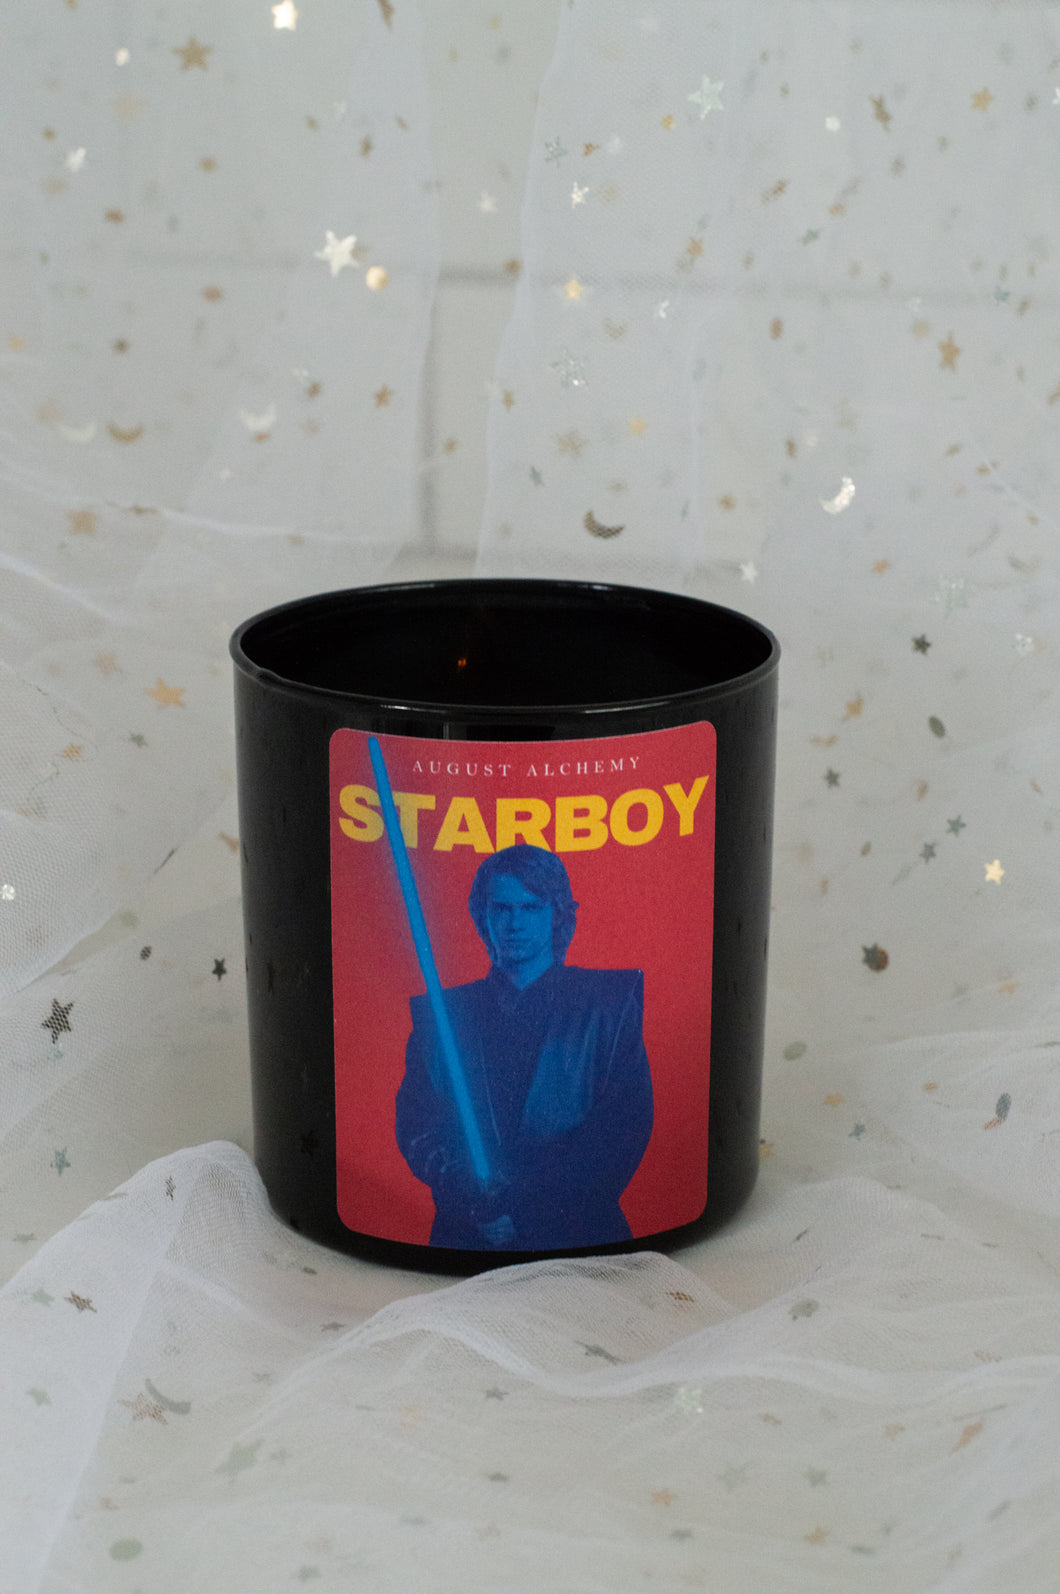 The Starboy Candle